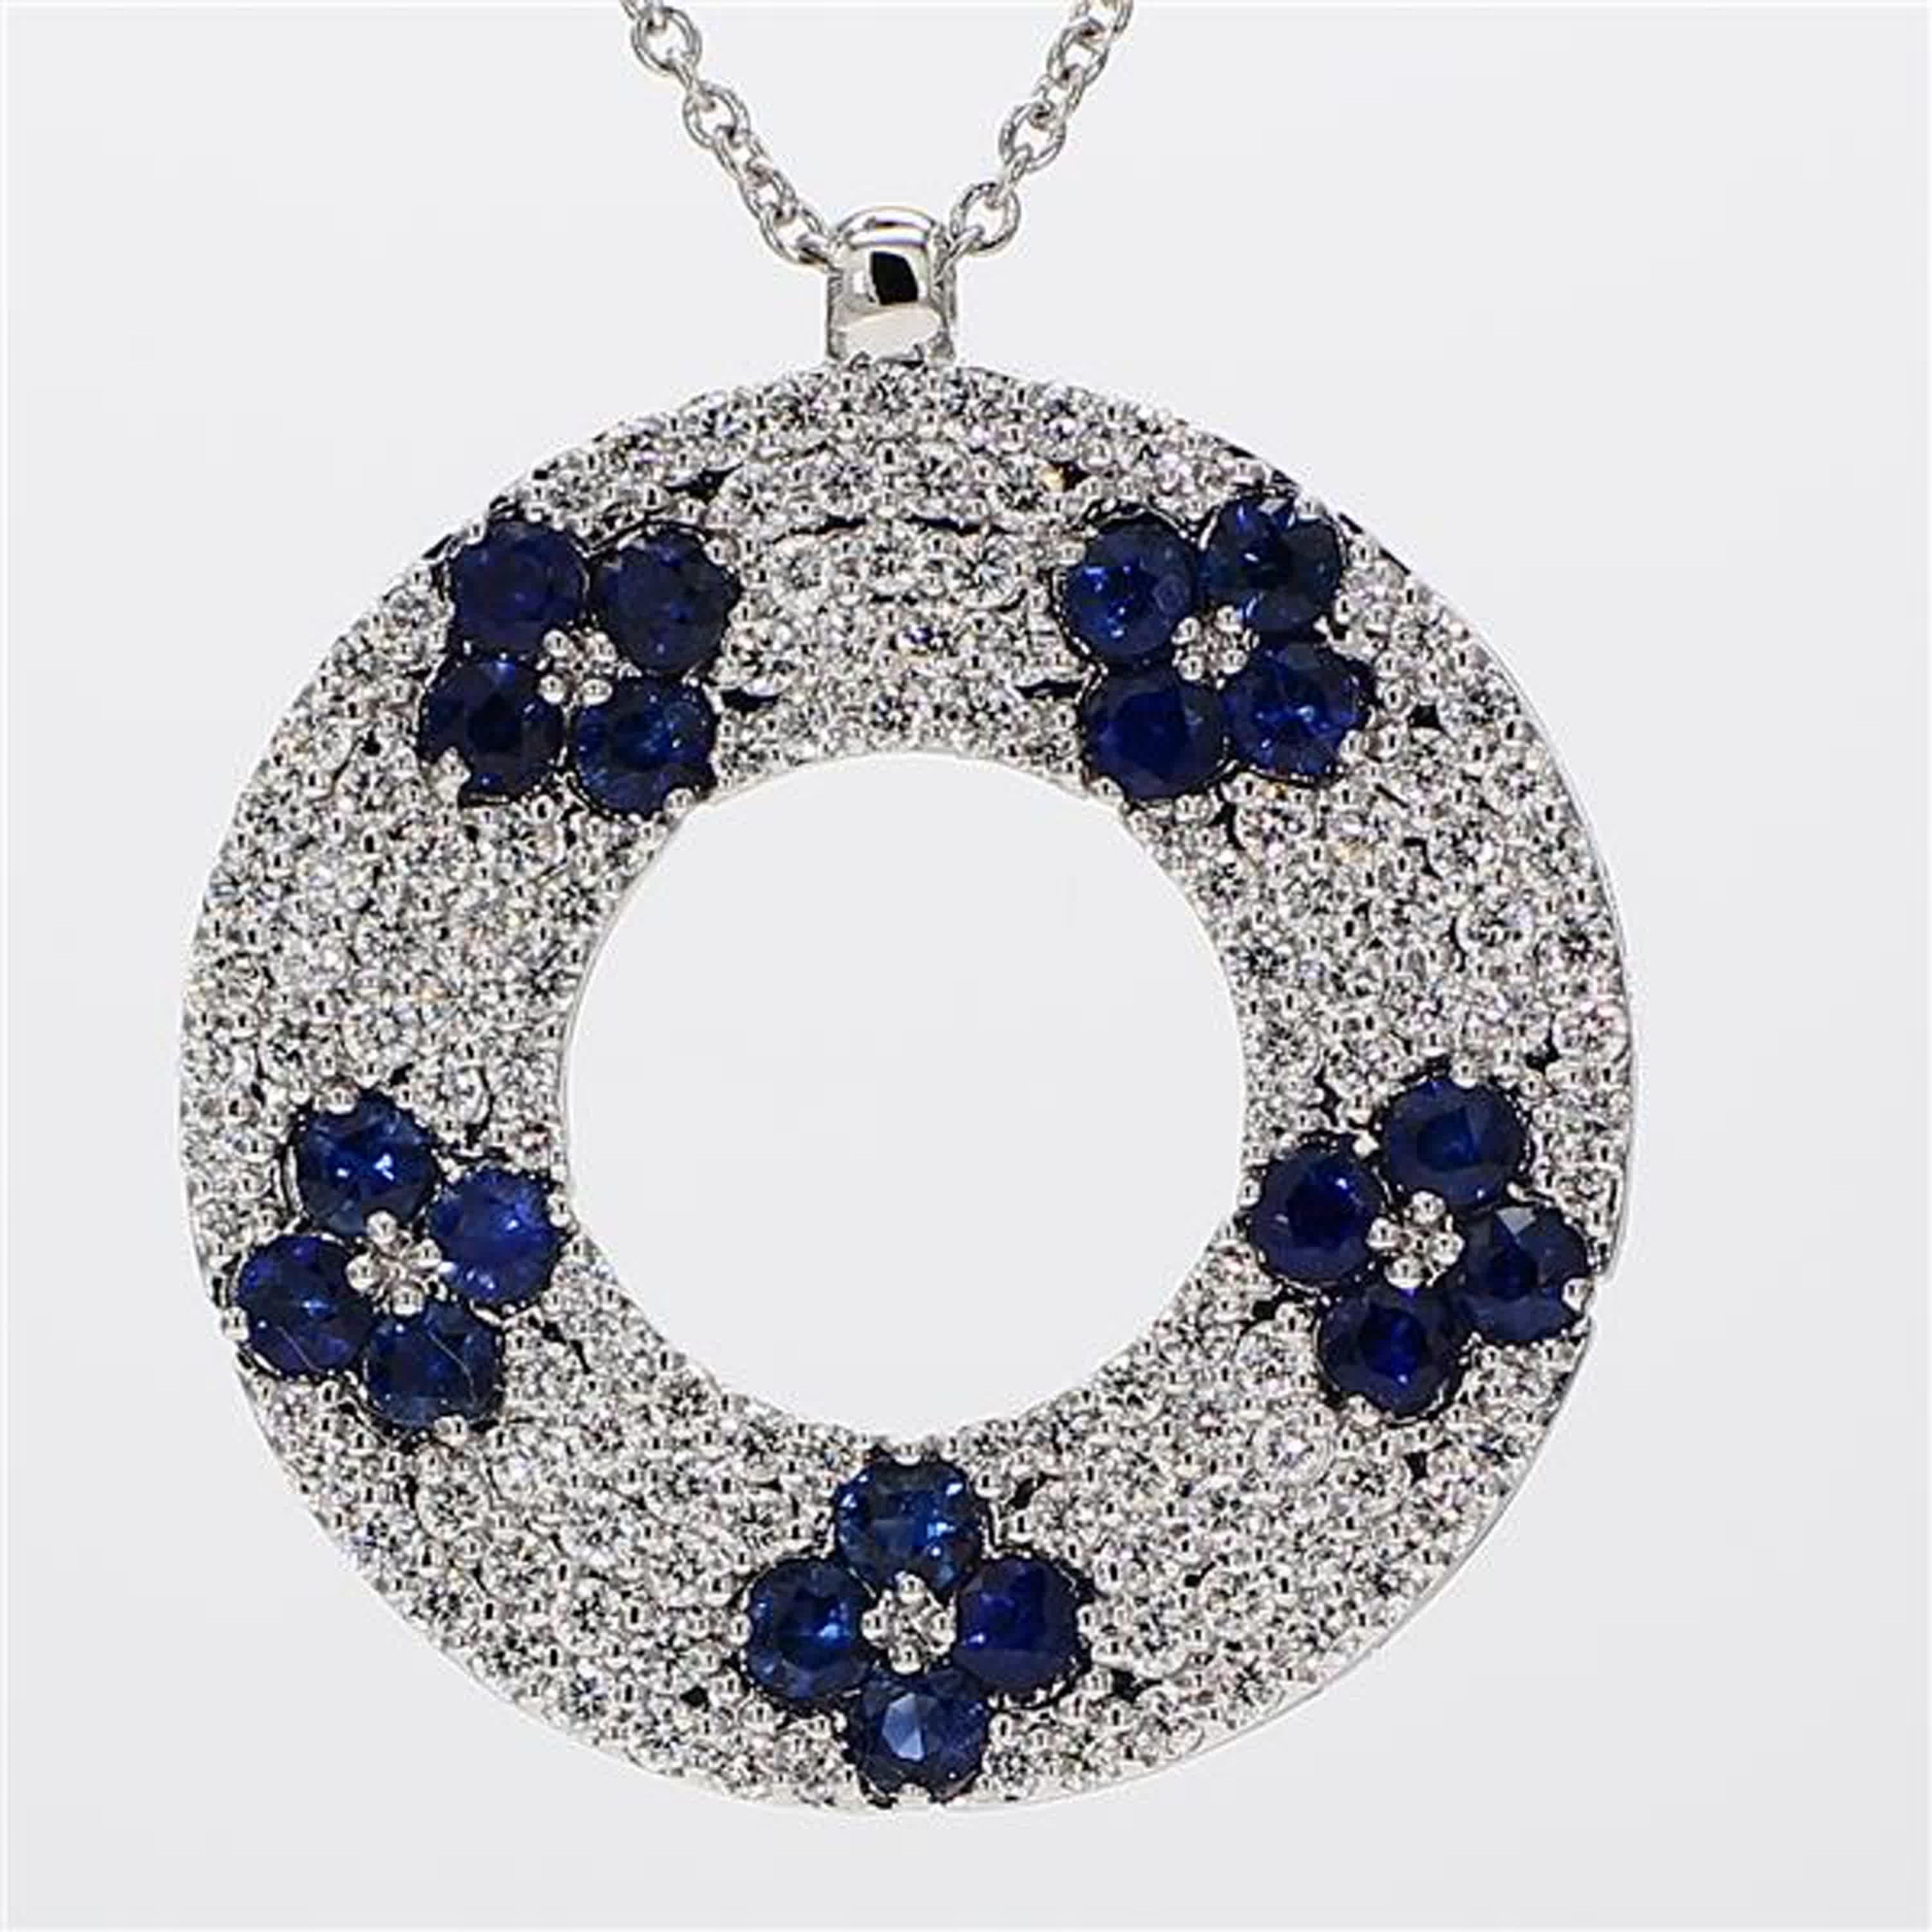 RareGemWorld's classic sapphire pendant. Mounted in a beautiful 18K White Gold setting with a natural round cut blue sapphires complimented by natural round cut white diamond melee. This pendant is guaranteed to impress and enhance your personal